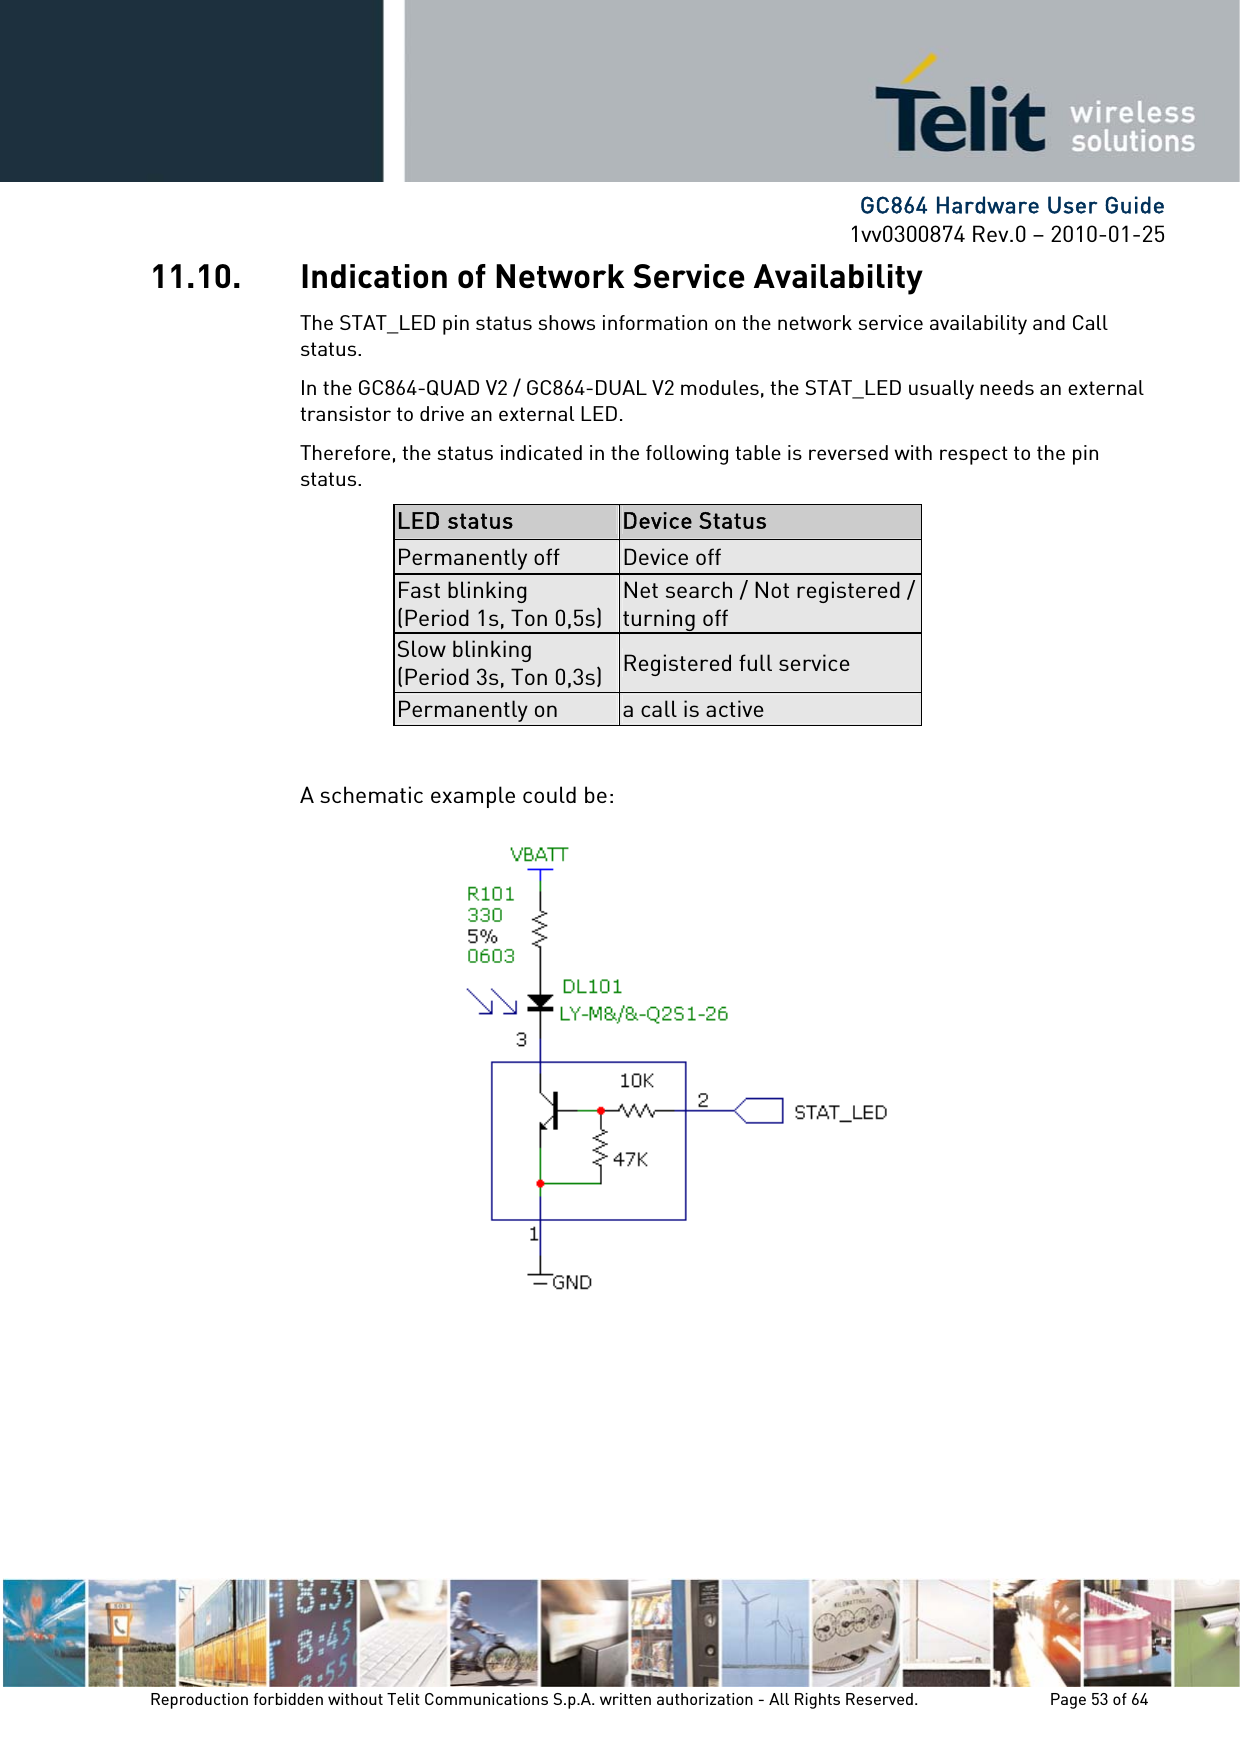      GC864 Hardware User Guide 1vv0300874 Rev.0 – 2010-01-25 Reproduction forbidden without Telit Communications S.p.A. written authorization - All Rights Reserved.    Page 53 of 64  11.10. Indication of Network Service Availability The STAT_LED pin status shows information on the network service availability and Call status.  In the GC864-QUAD V2 / GC864-DUAL V2 modules, the STAT_LED usually needs an external transistor to drive an external LED. Therefore, the status indicated in the following table is reversed with respect to the pin status. LED status  Device Status Permanently off  Device off Fast blinking (Period 1s, Ton 0,5s) Net search / Not registered / turning off Slow blinking (Period 3s, Ton 0,3s)  Registered full service Permanently on  a call is active  A schematic example could be:         